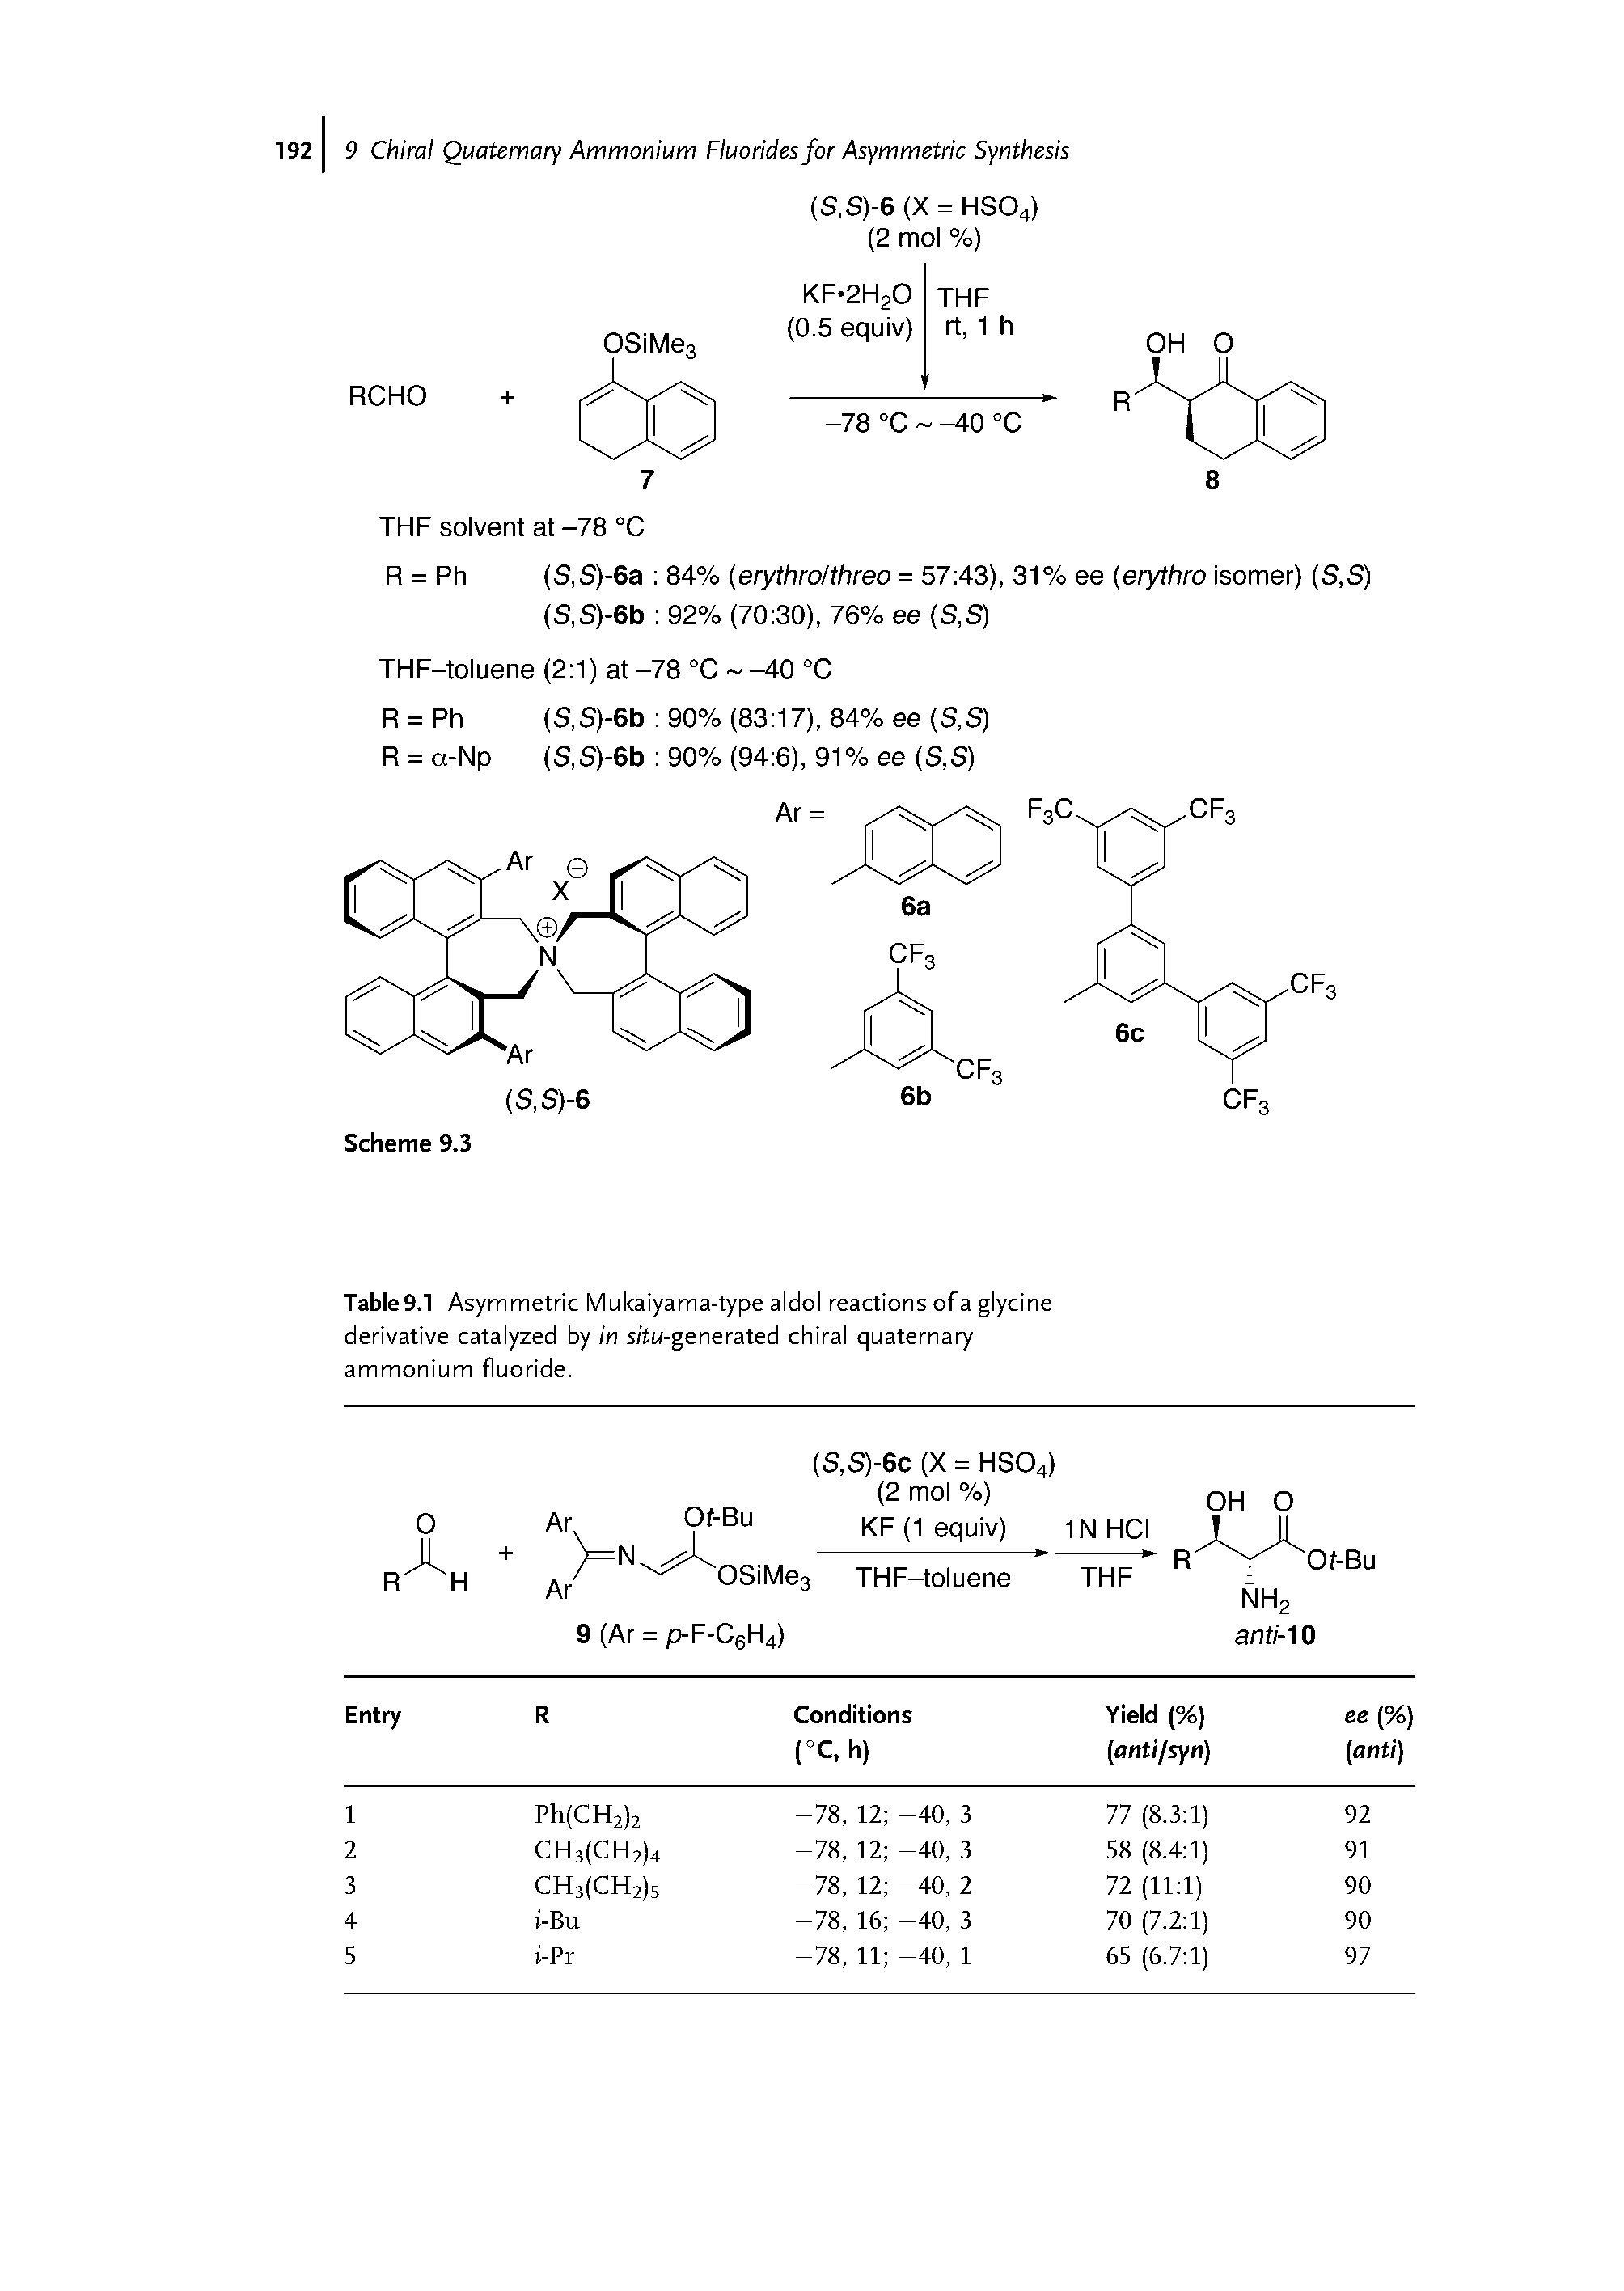 Table 9.1 Asymmetric Mukaiyama-type aldol reactions of a glycine derivative catalyzed by in situ-generated chiral quaternary ammonium fluoride.